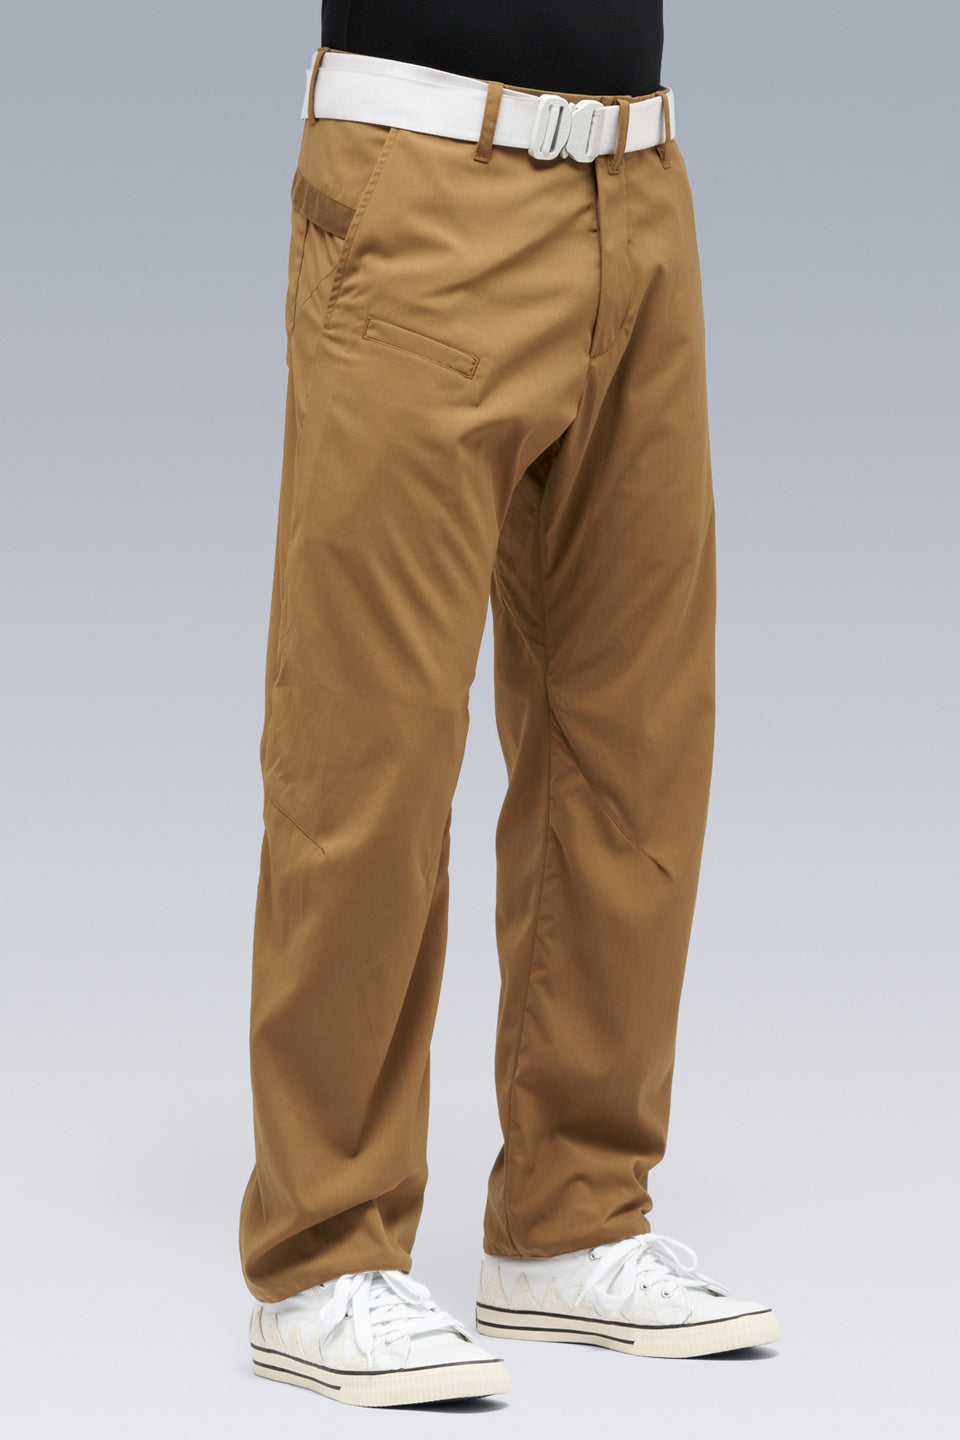 ACRONYM "P39-M Milliken Real Military Strong Fabric Military Pants"(COYOTE)